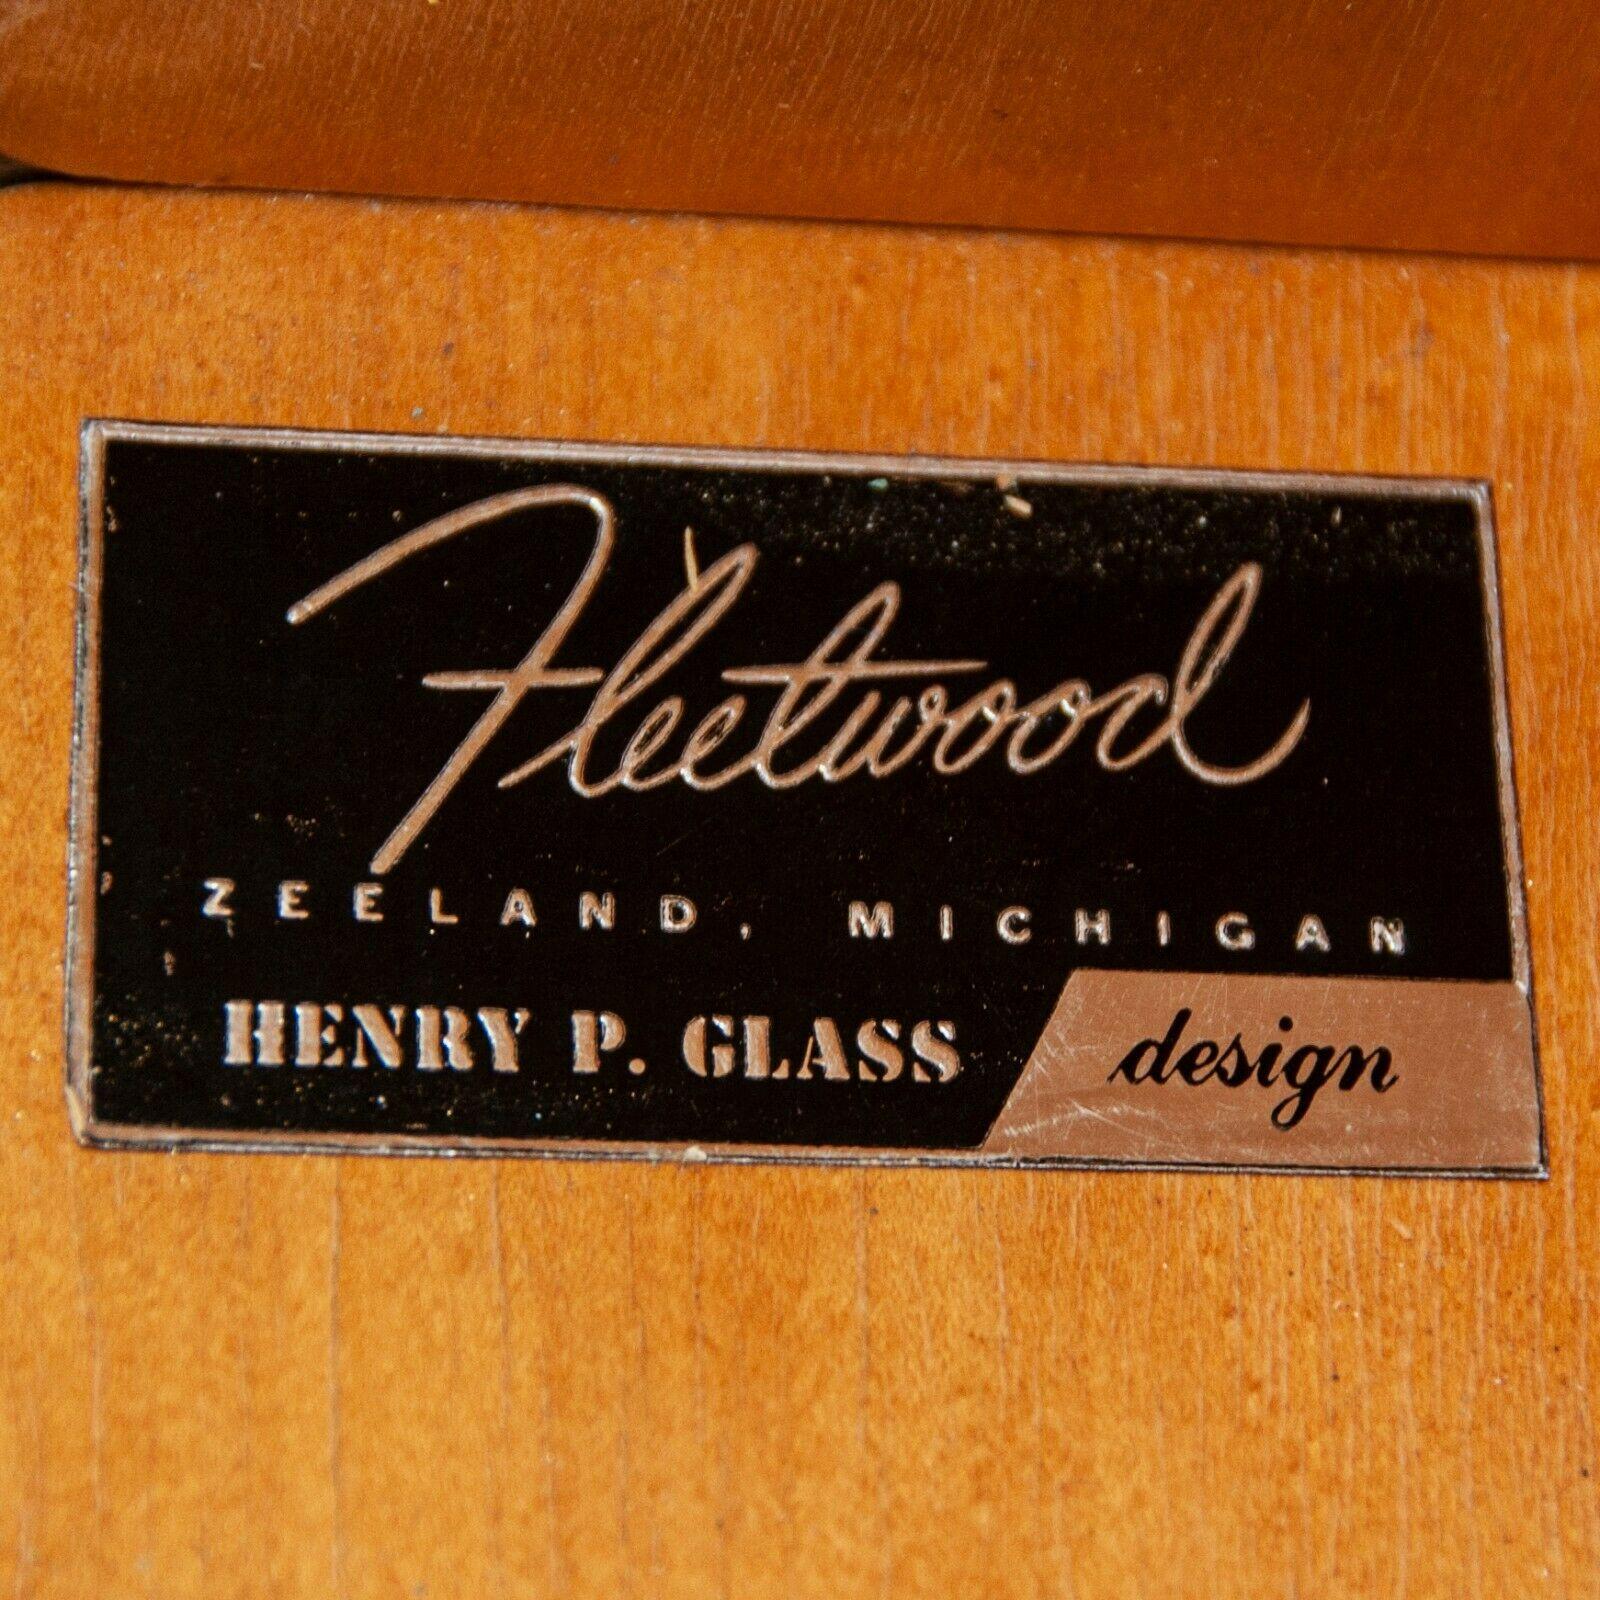 Metal 1956 Henry P. Glass for Fleetwood of Zeeland Michigan Armoire Cabinet Chest For Sale